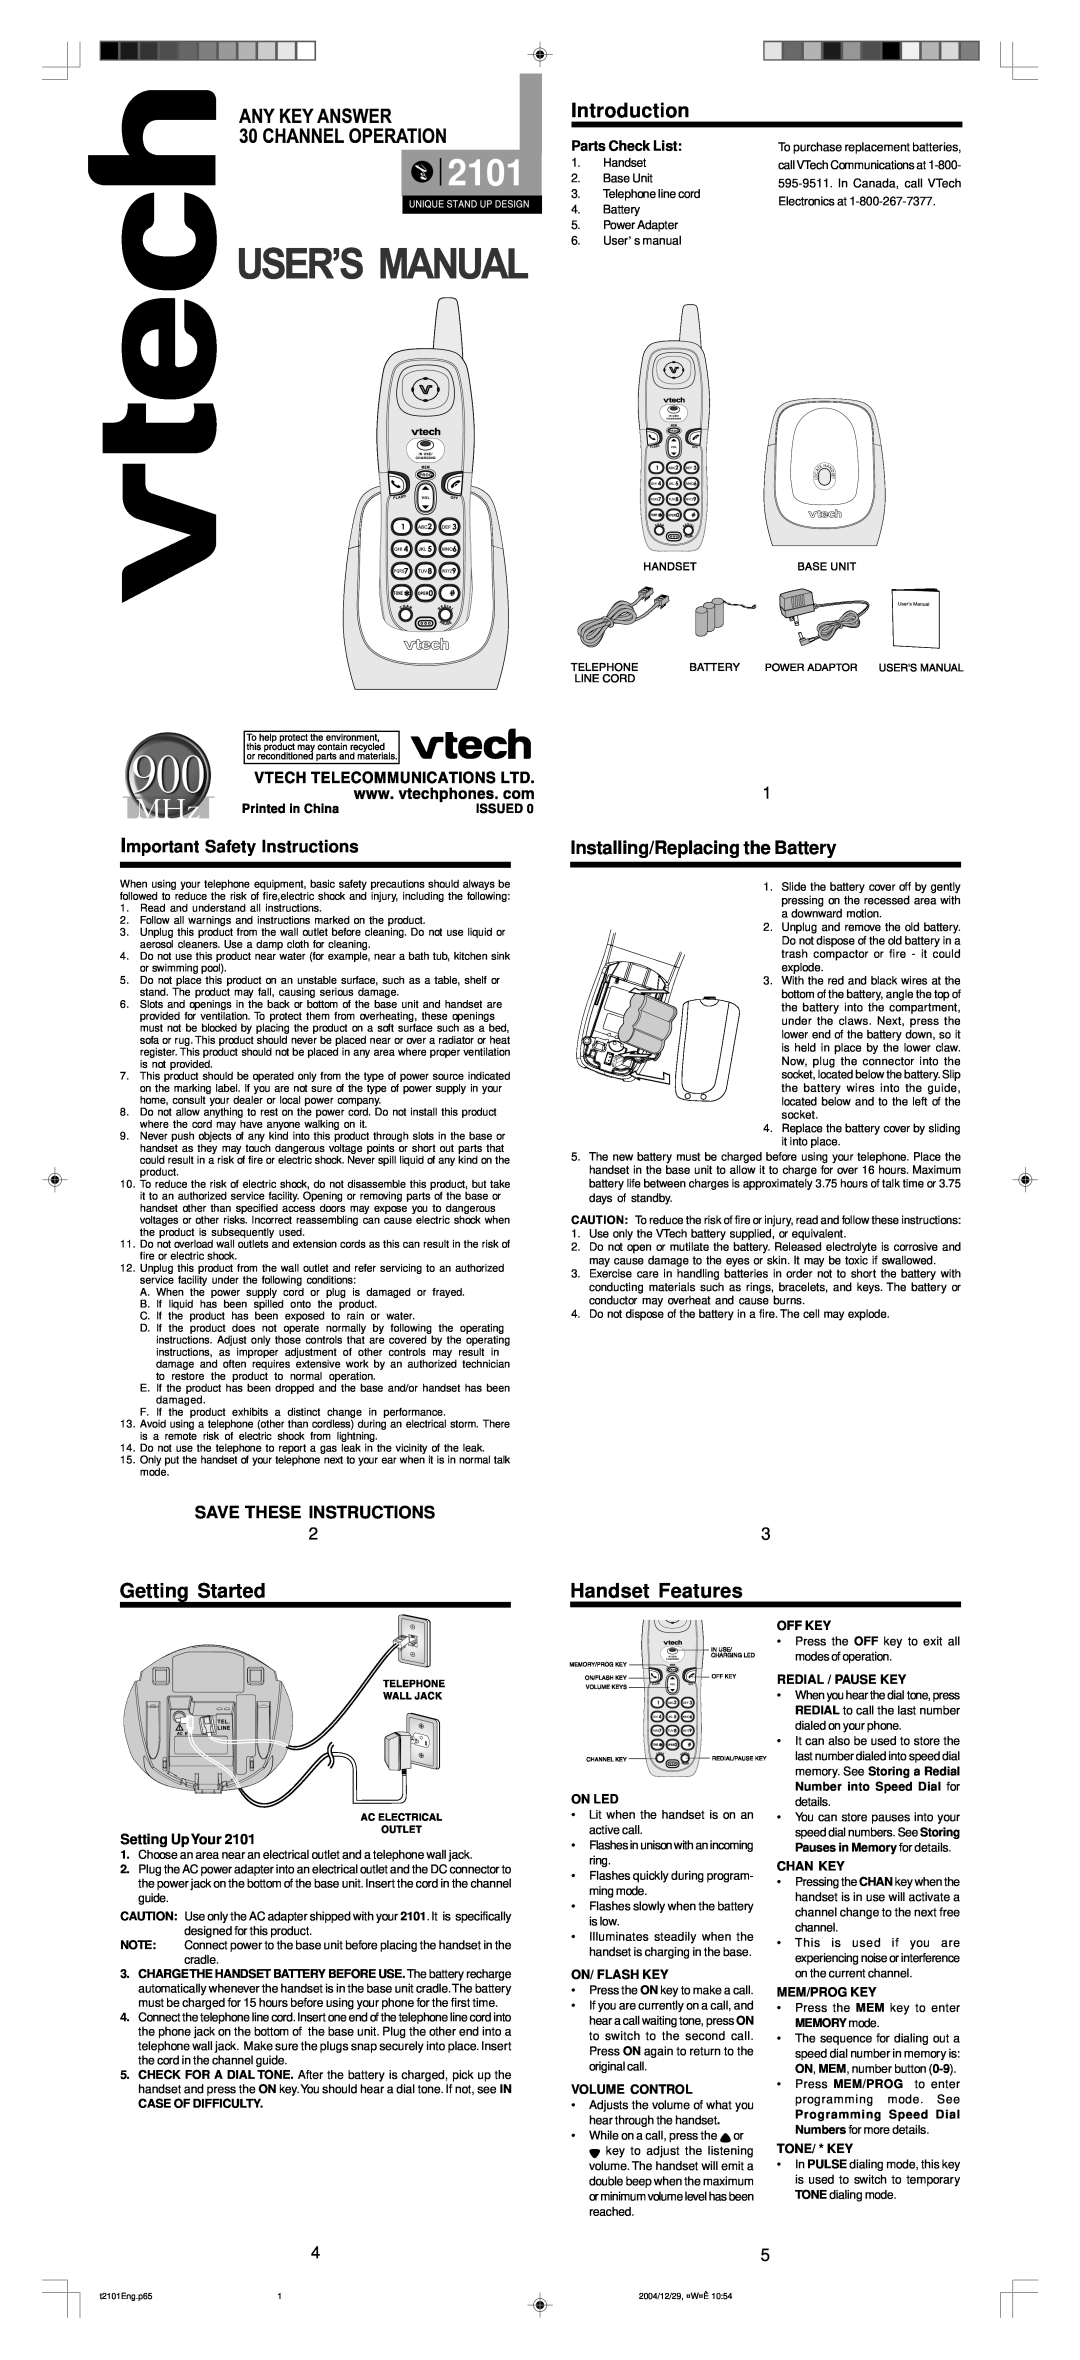 VTech 2101 user manual Introduction, Getting Started, Handset Features, Installing/Replacing the Battery 